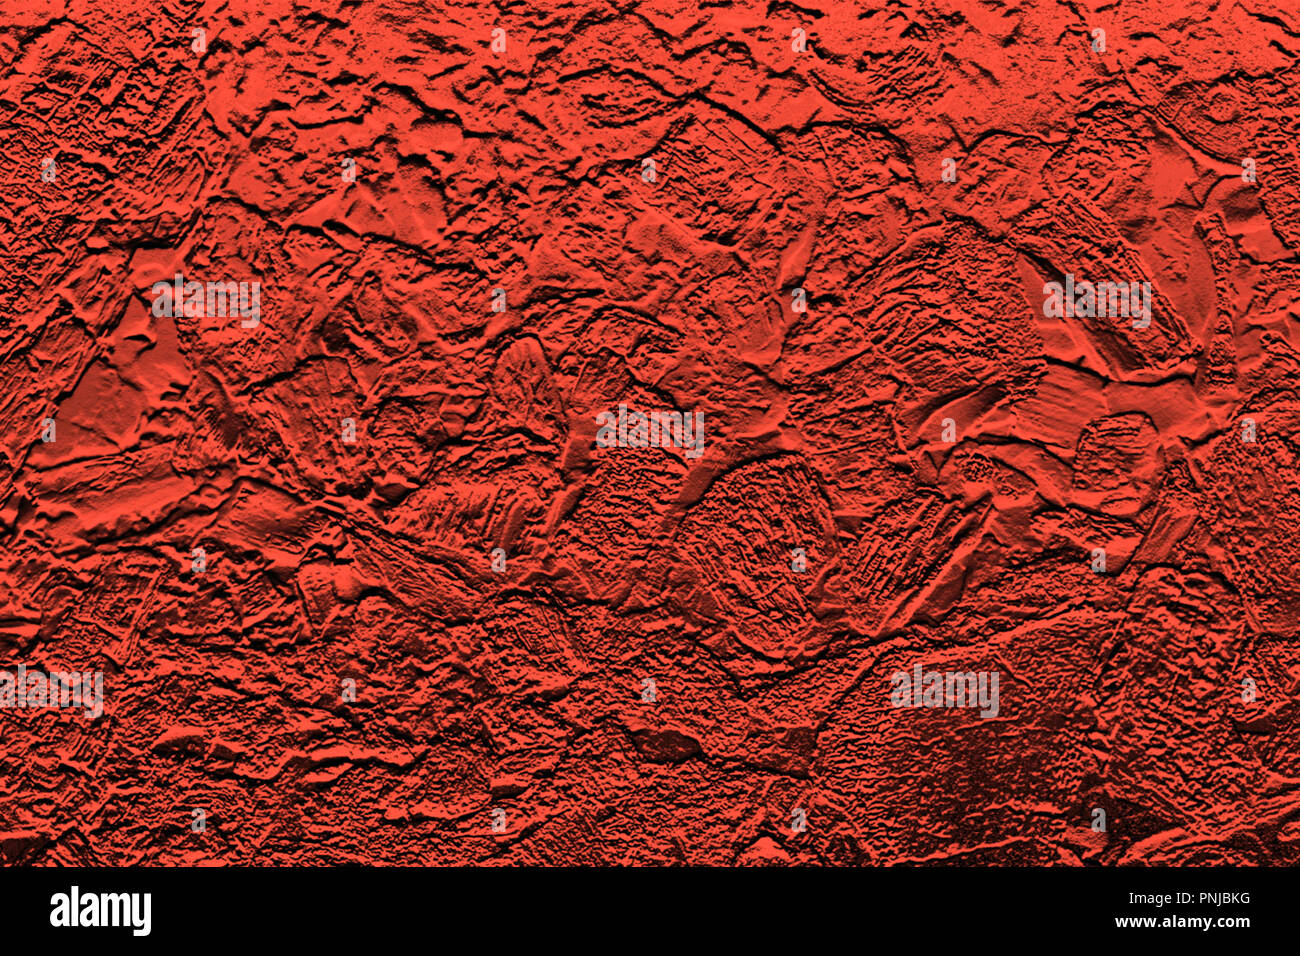 Imitation of red wrinkled foil, bright abstract backround. Use Hue/Saturation to change color Stock Photo